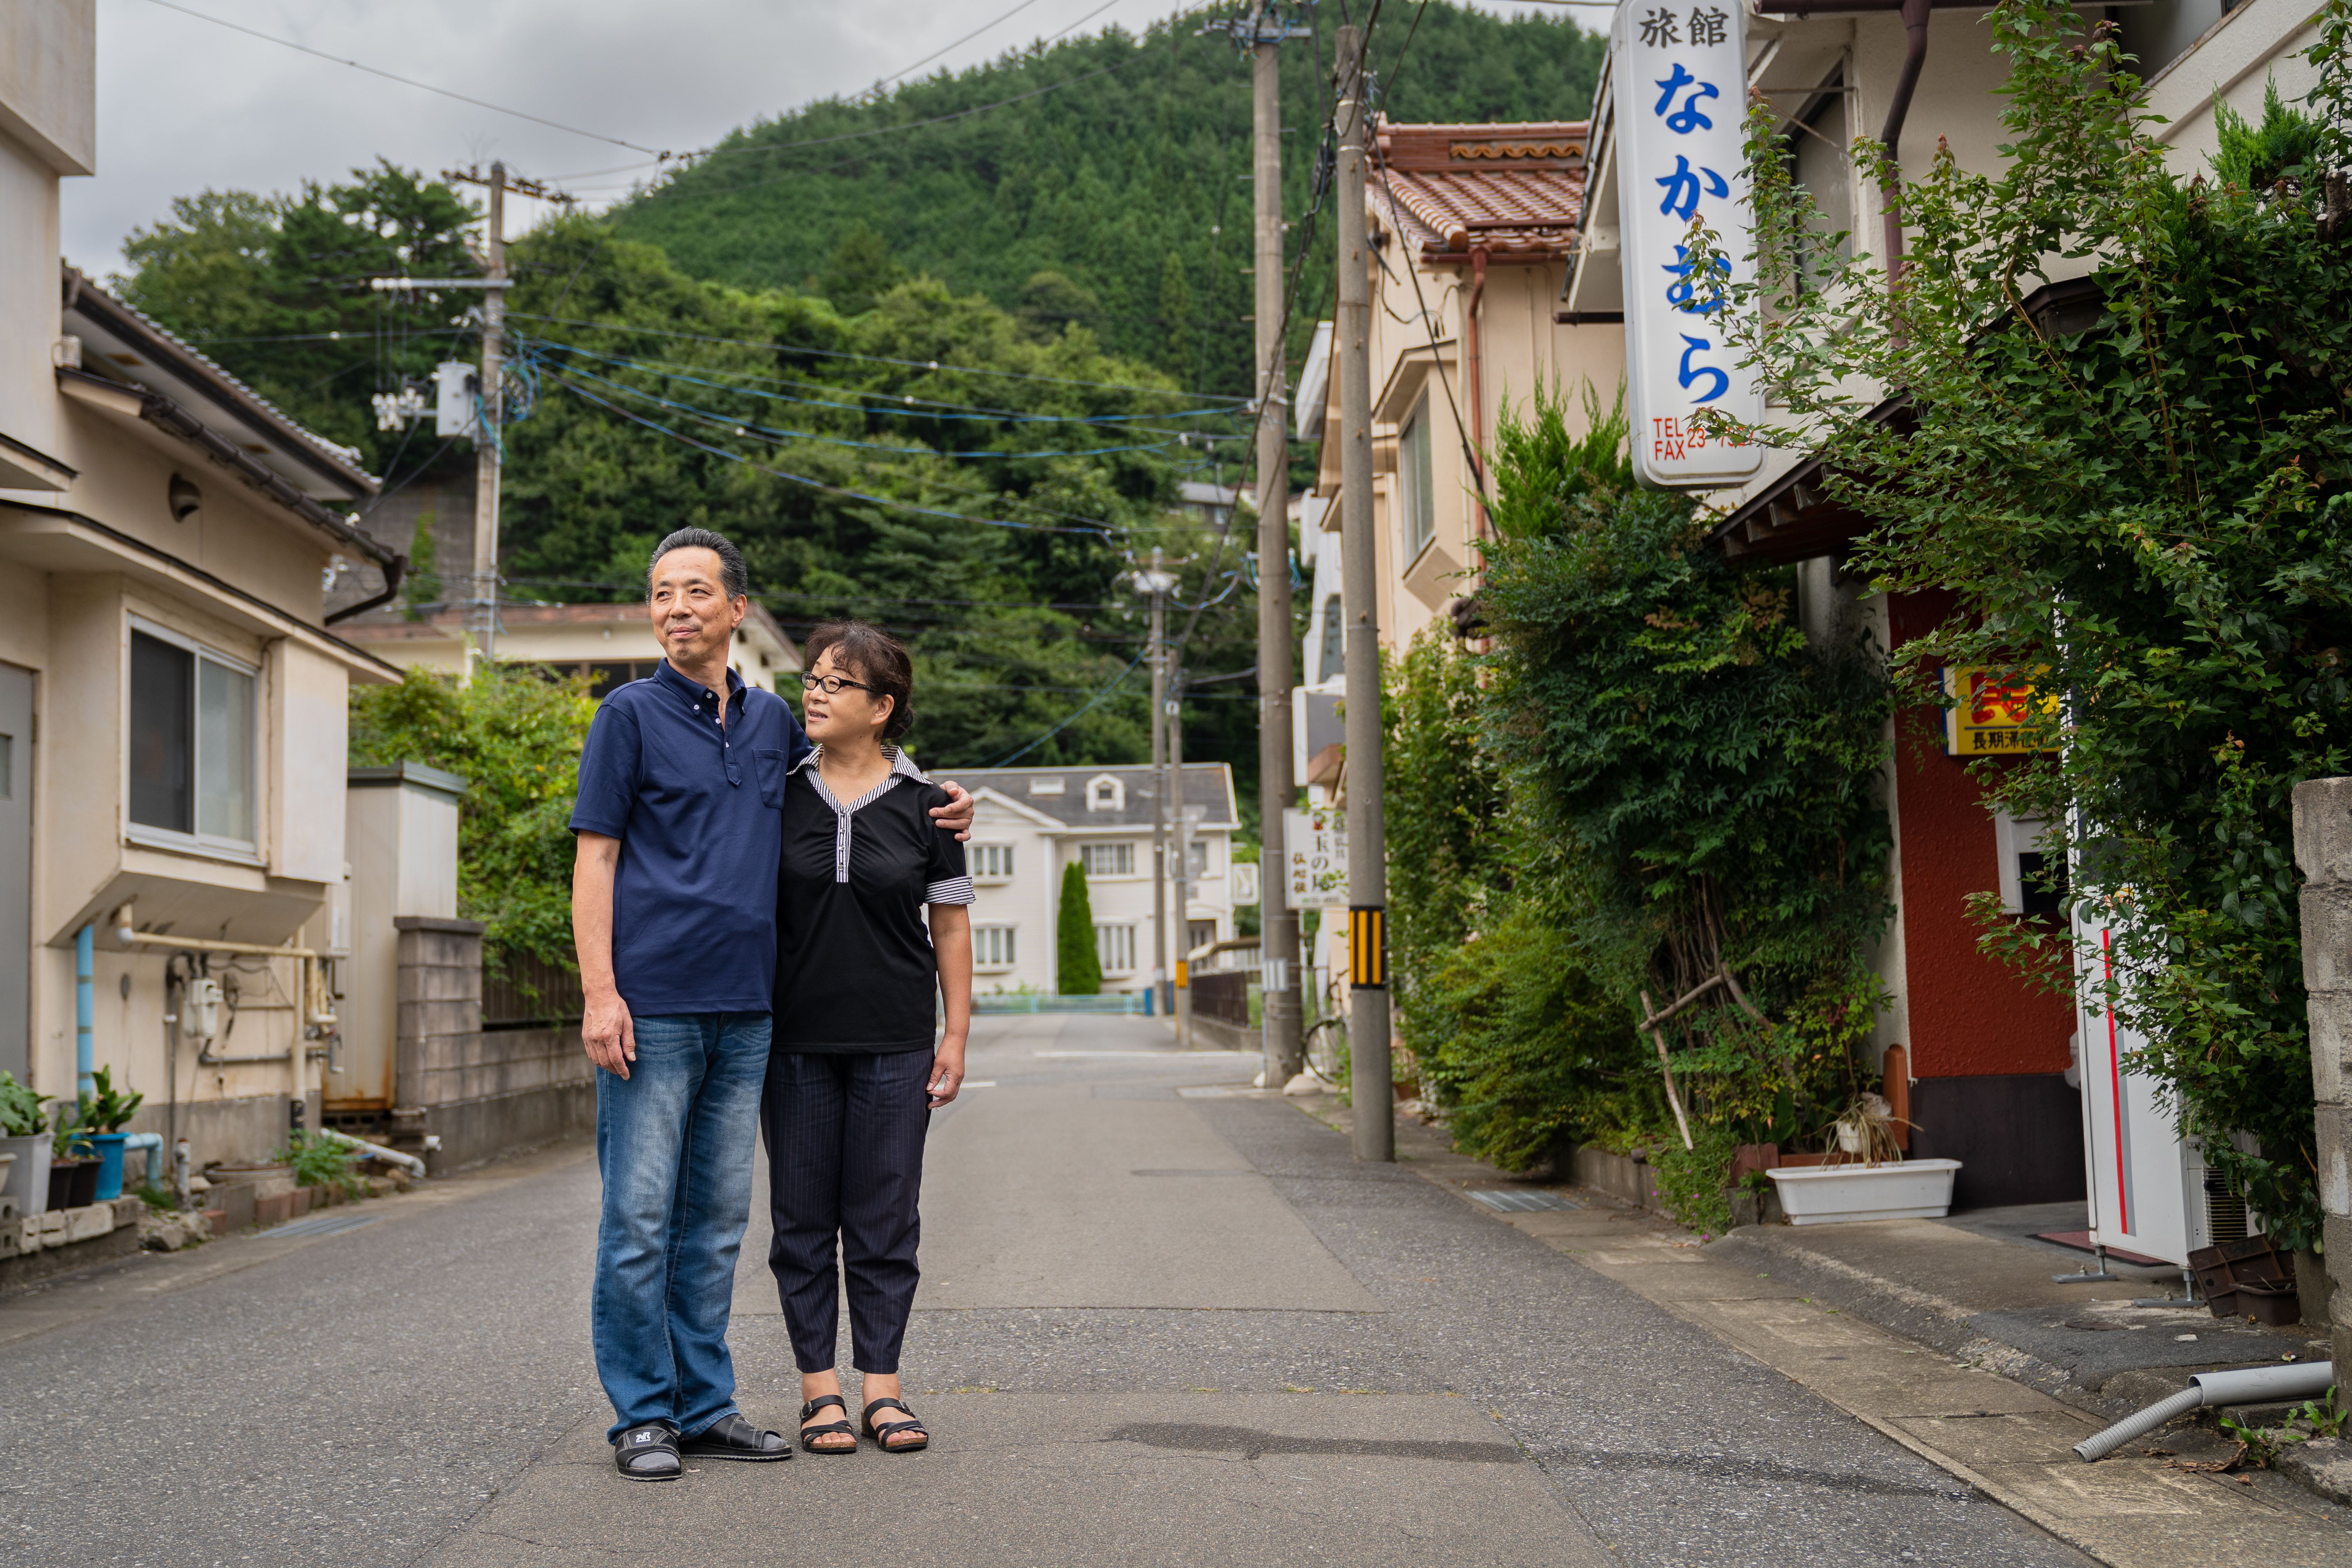 Two Airbnb hosts stand in the middle of the road in Kamaishi, Japan.